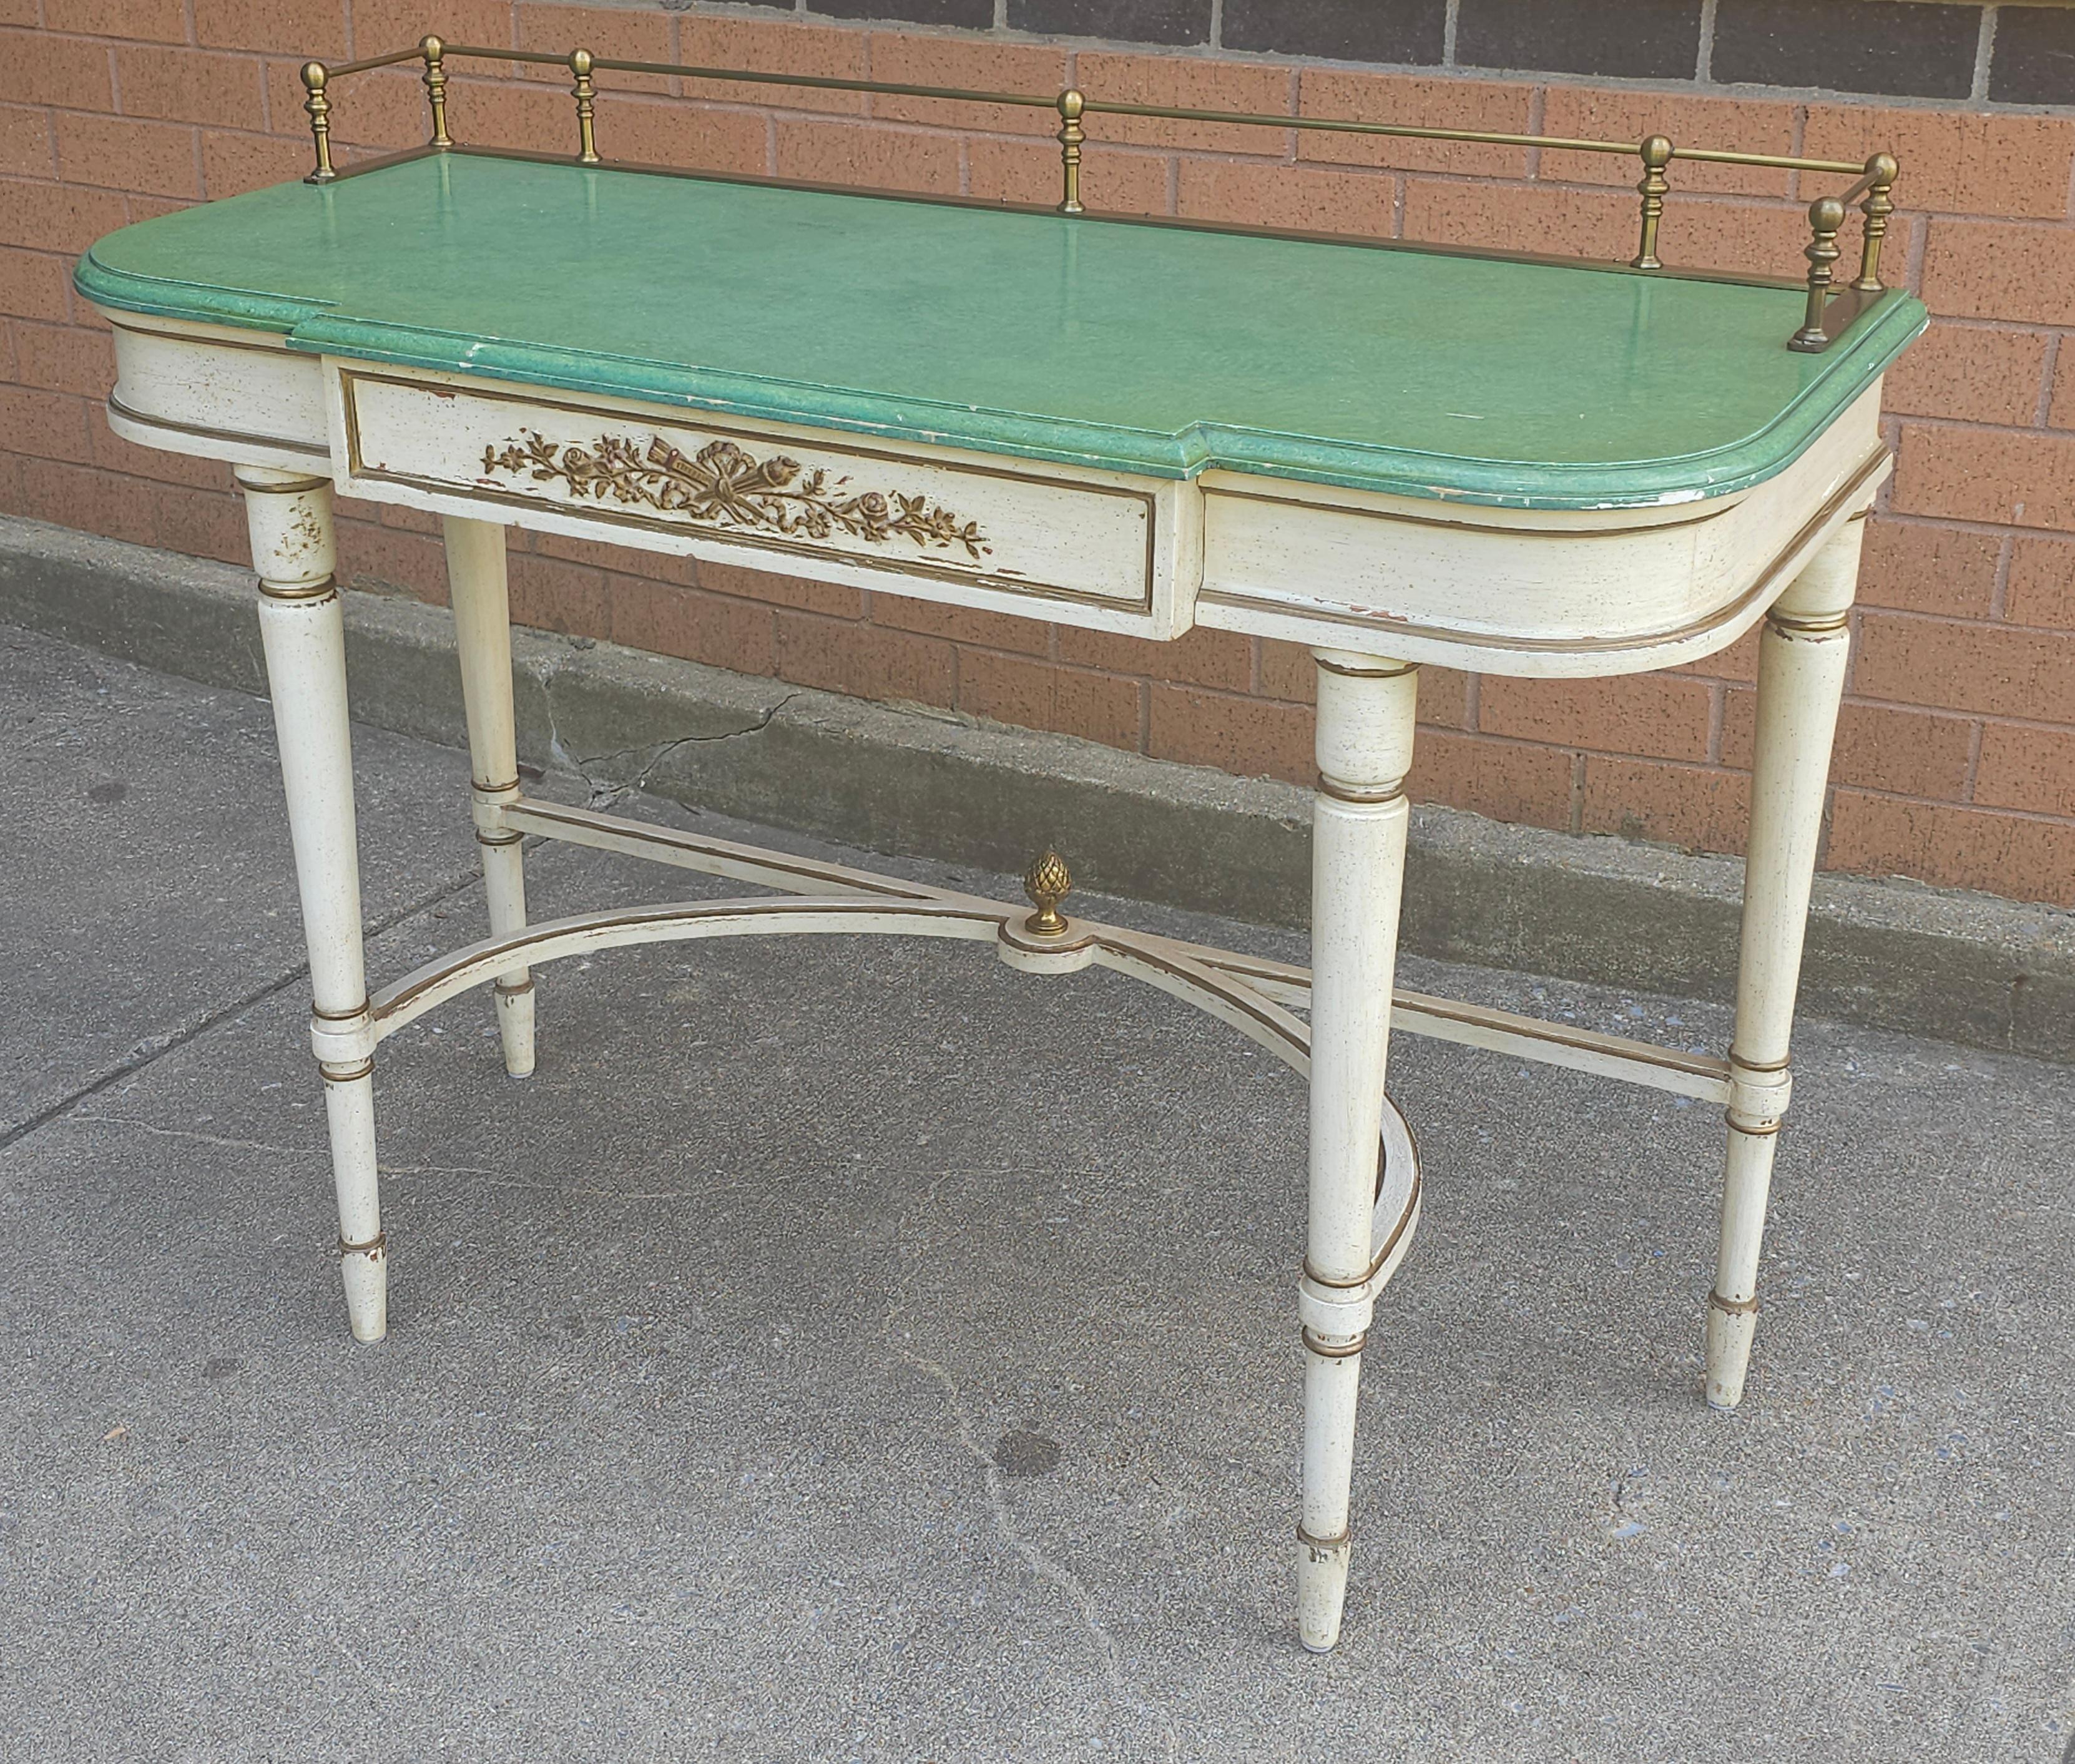 A Louis XVI Style Partial Gilt, Cream and Green Enamel Painted Console Table with brass gallery. Measures 42